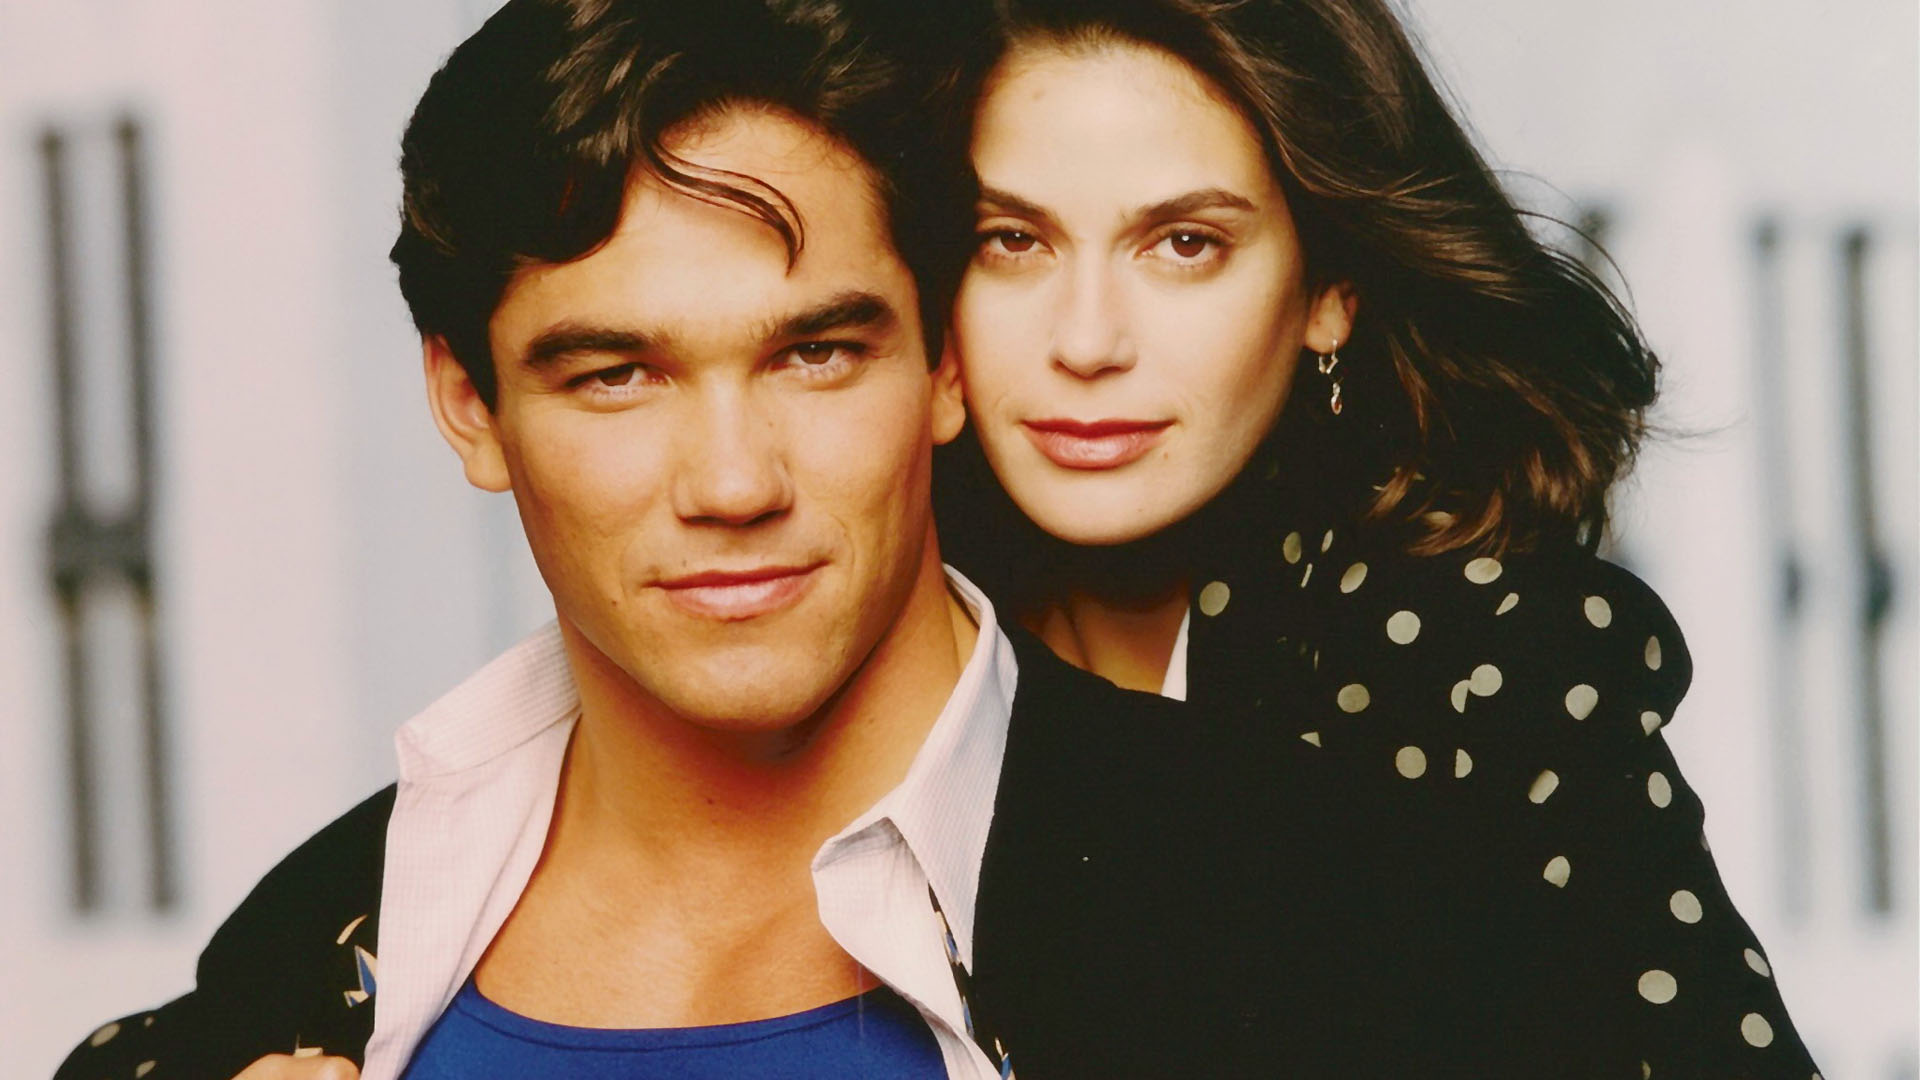 Lois And Clark Wallpaper